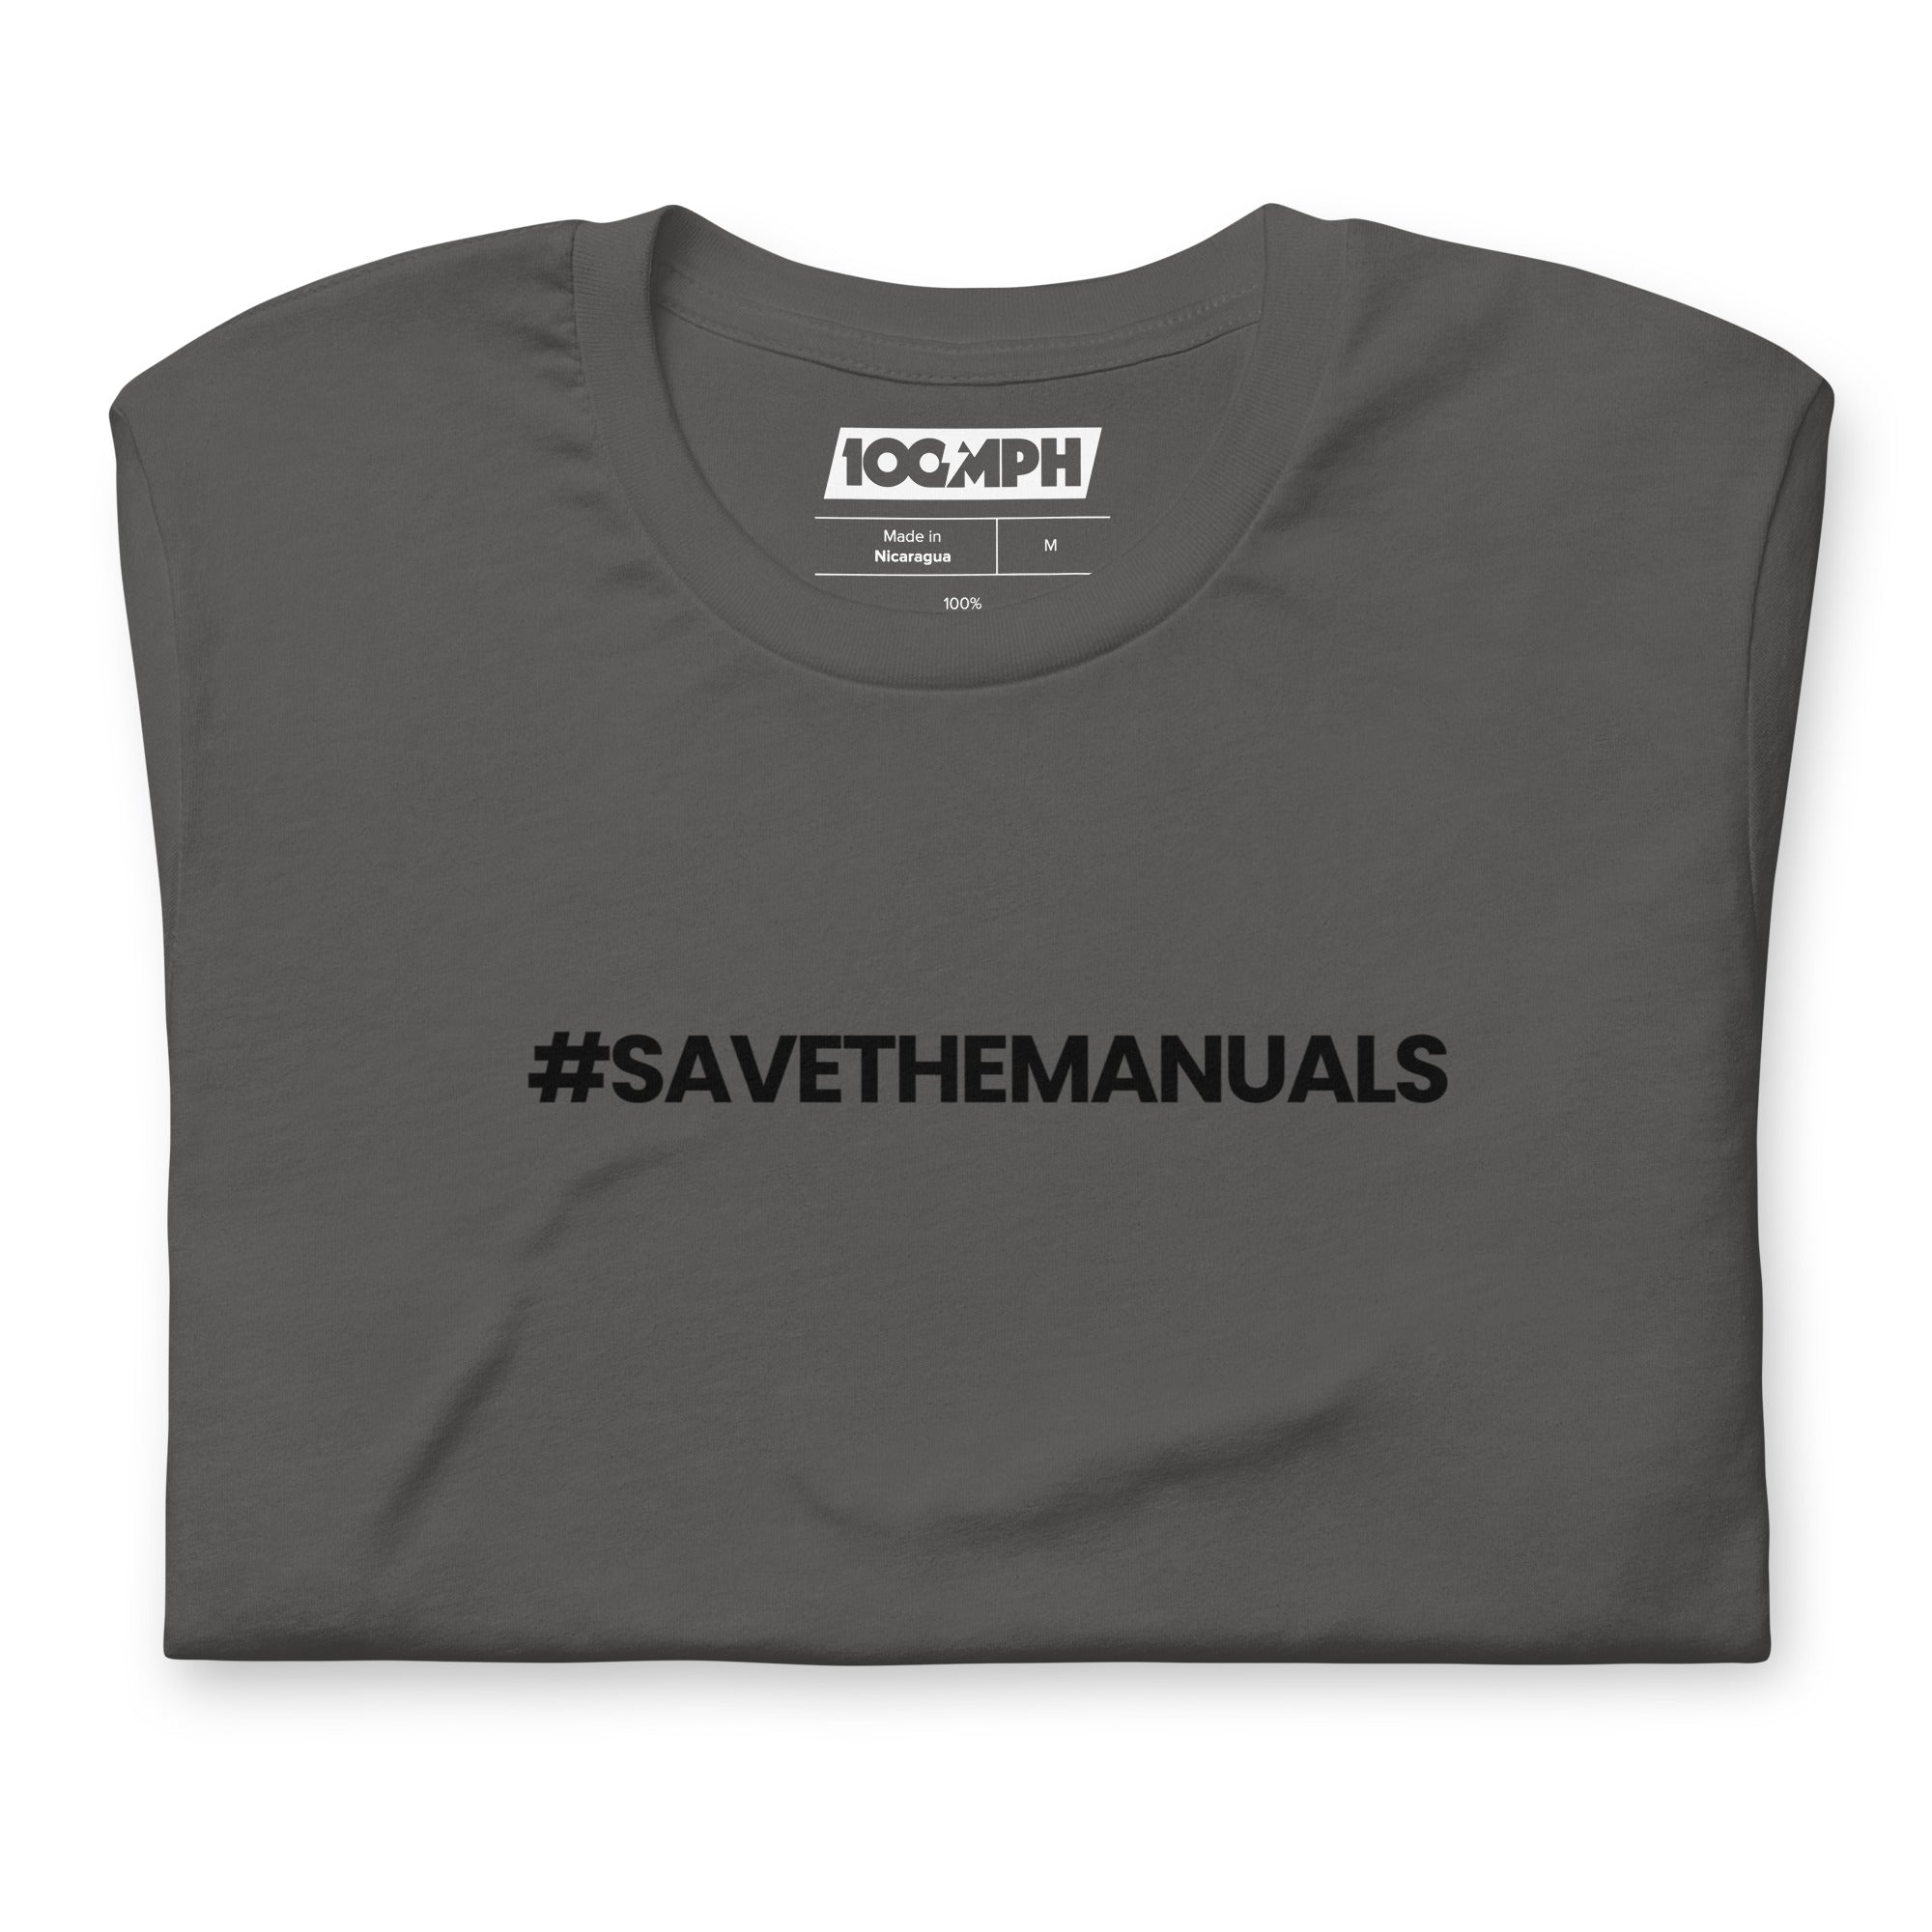 Hashtag - Save The Manuals